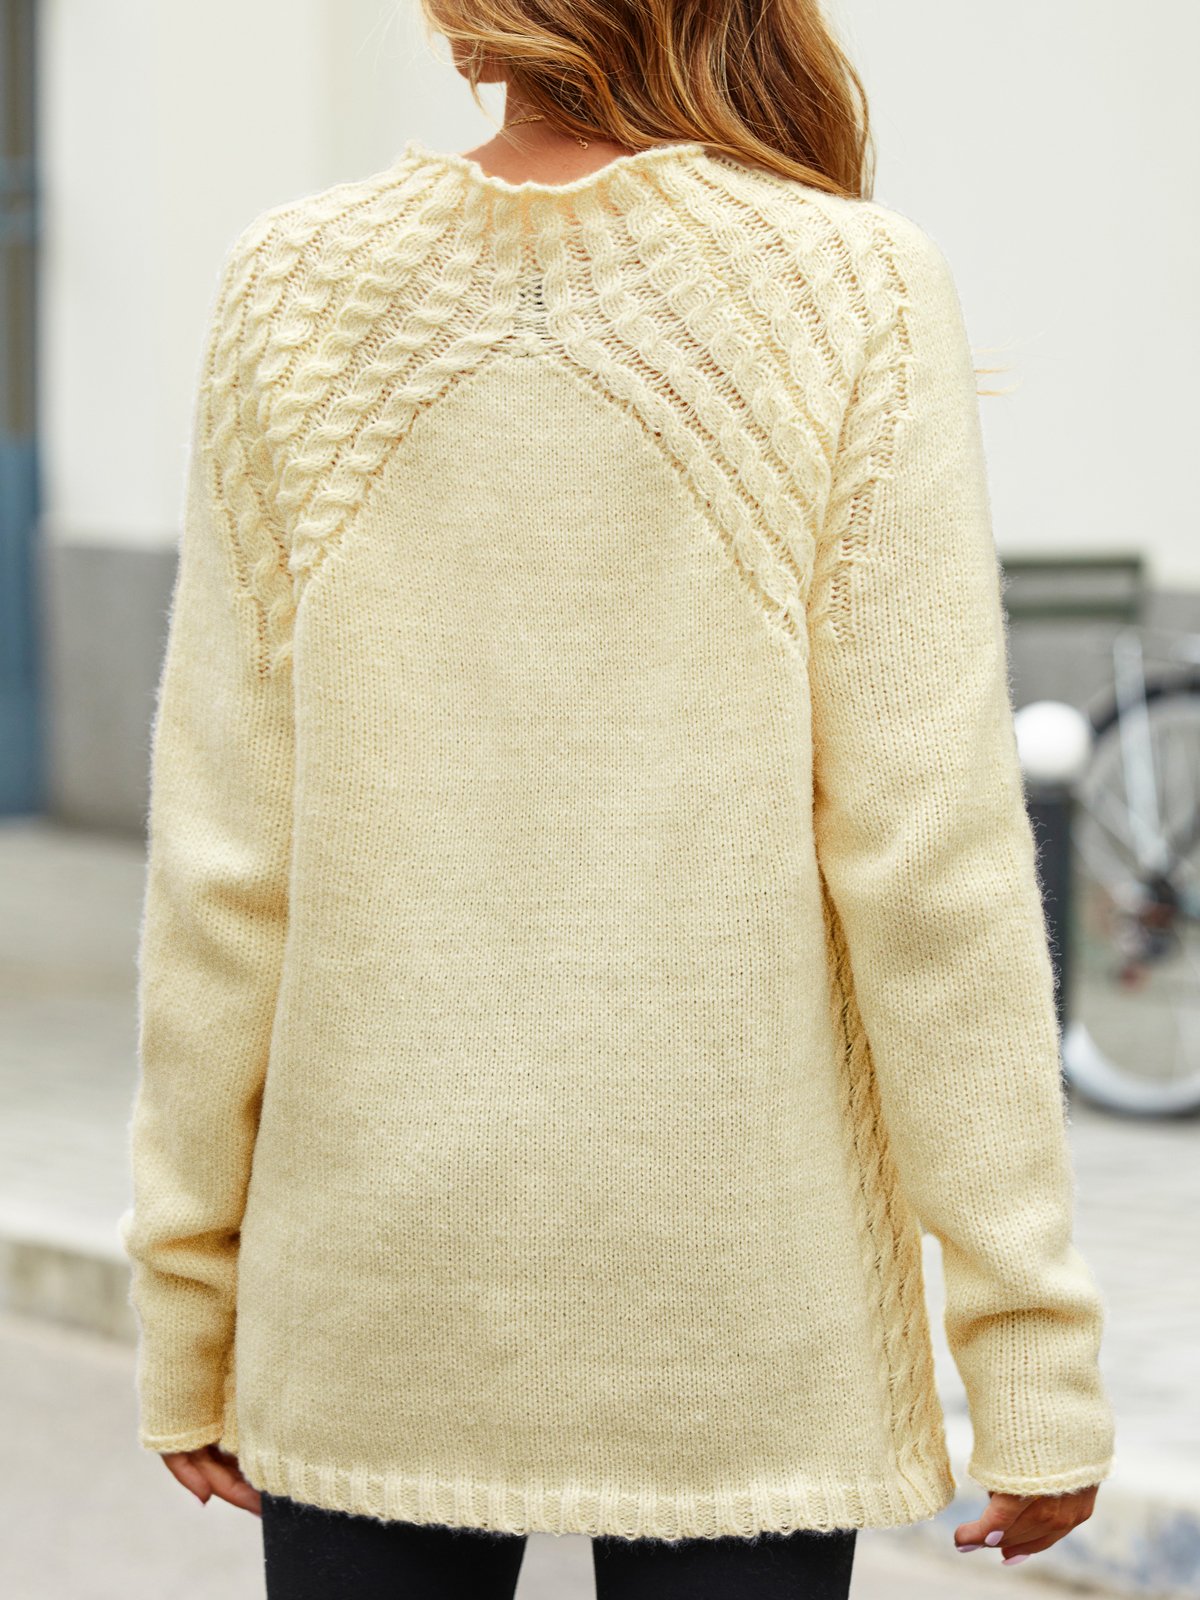 JFN White Long Sleeve Knitted Sweater